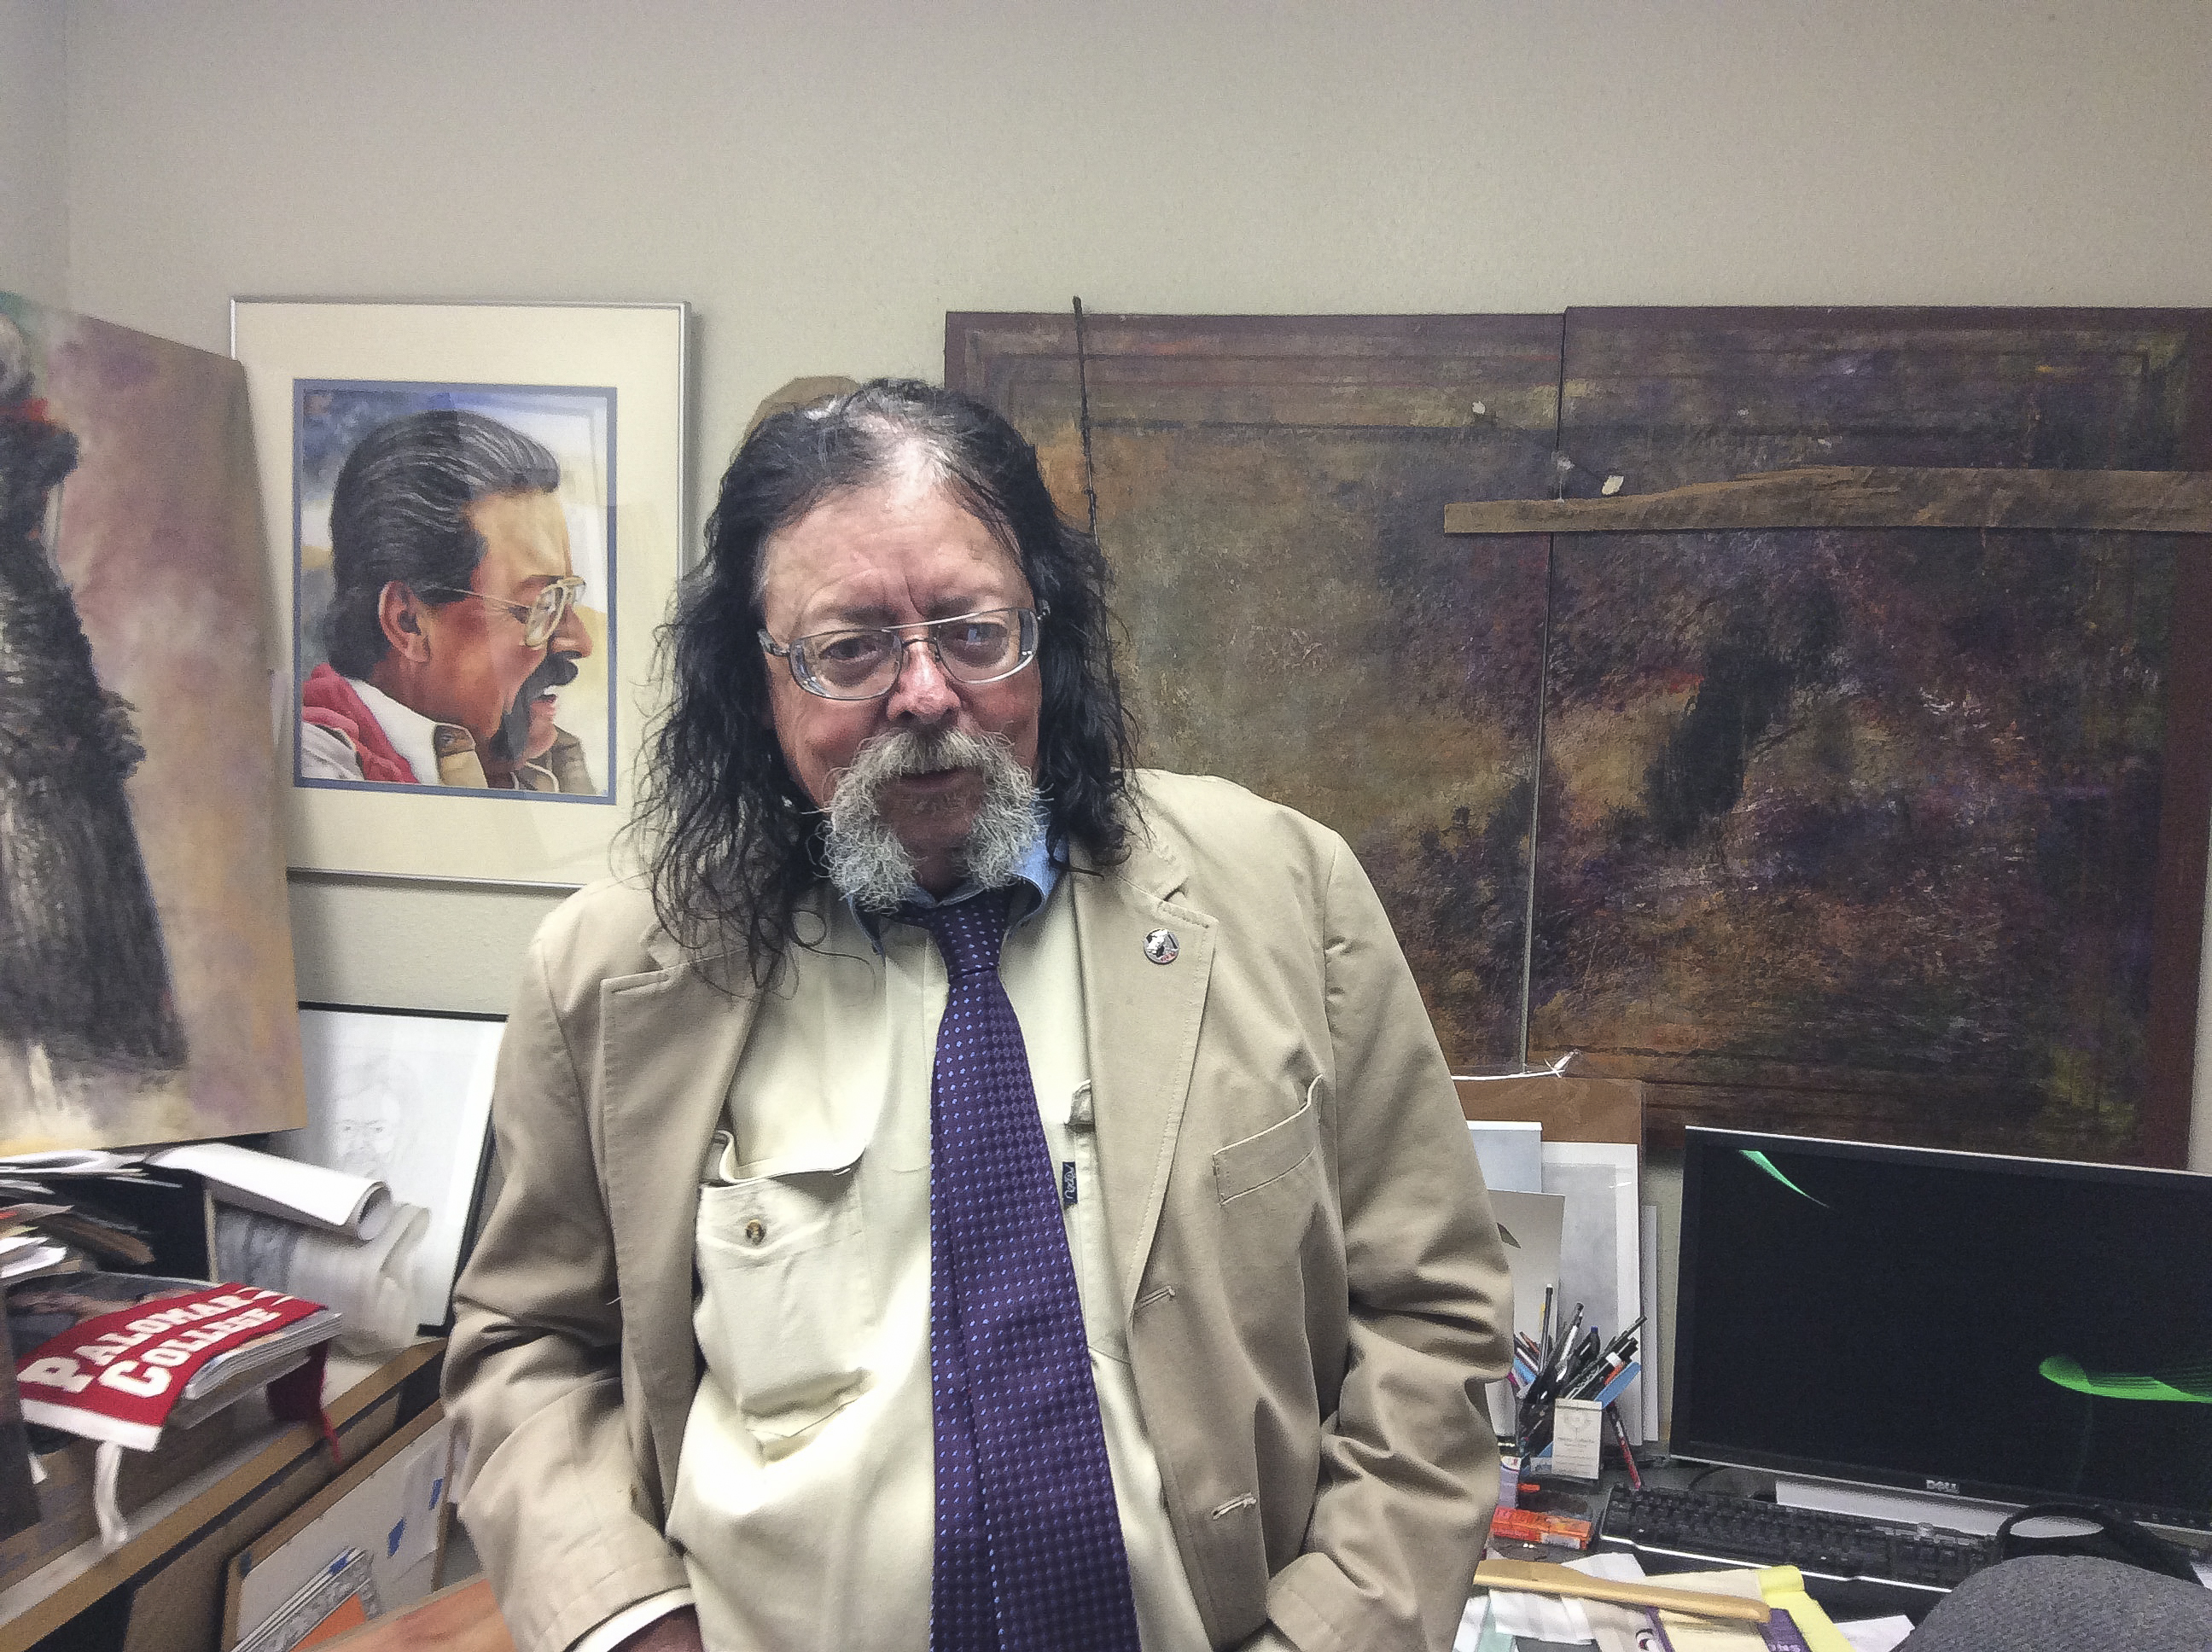 Professor Doug Durrant in his office during the spring 2015 semester before he retired. Joel Vaughn/The Telescope